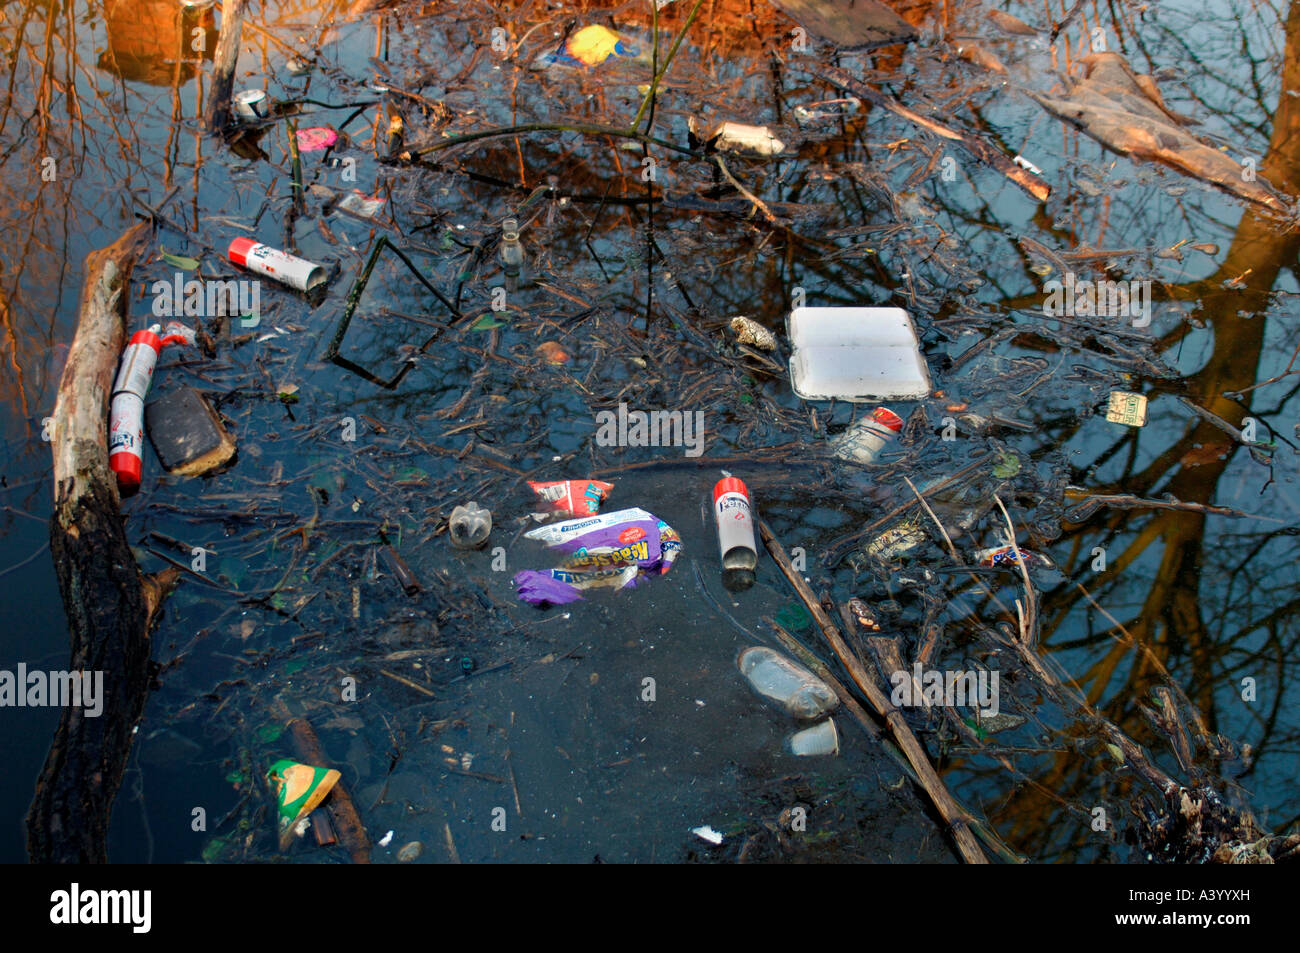 Rubbish Dumped Into The Waters Of The Cauldon Canal In Staffordshire (UK). Stock Photo